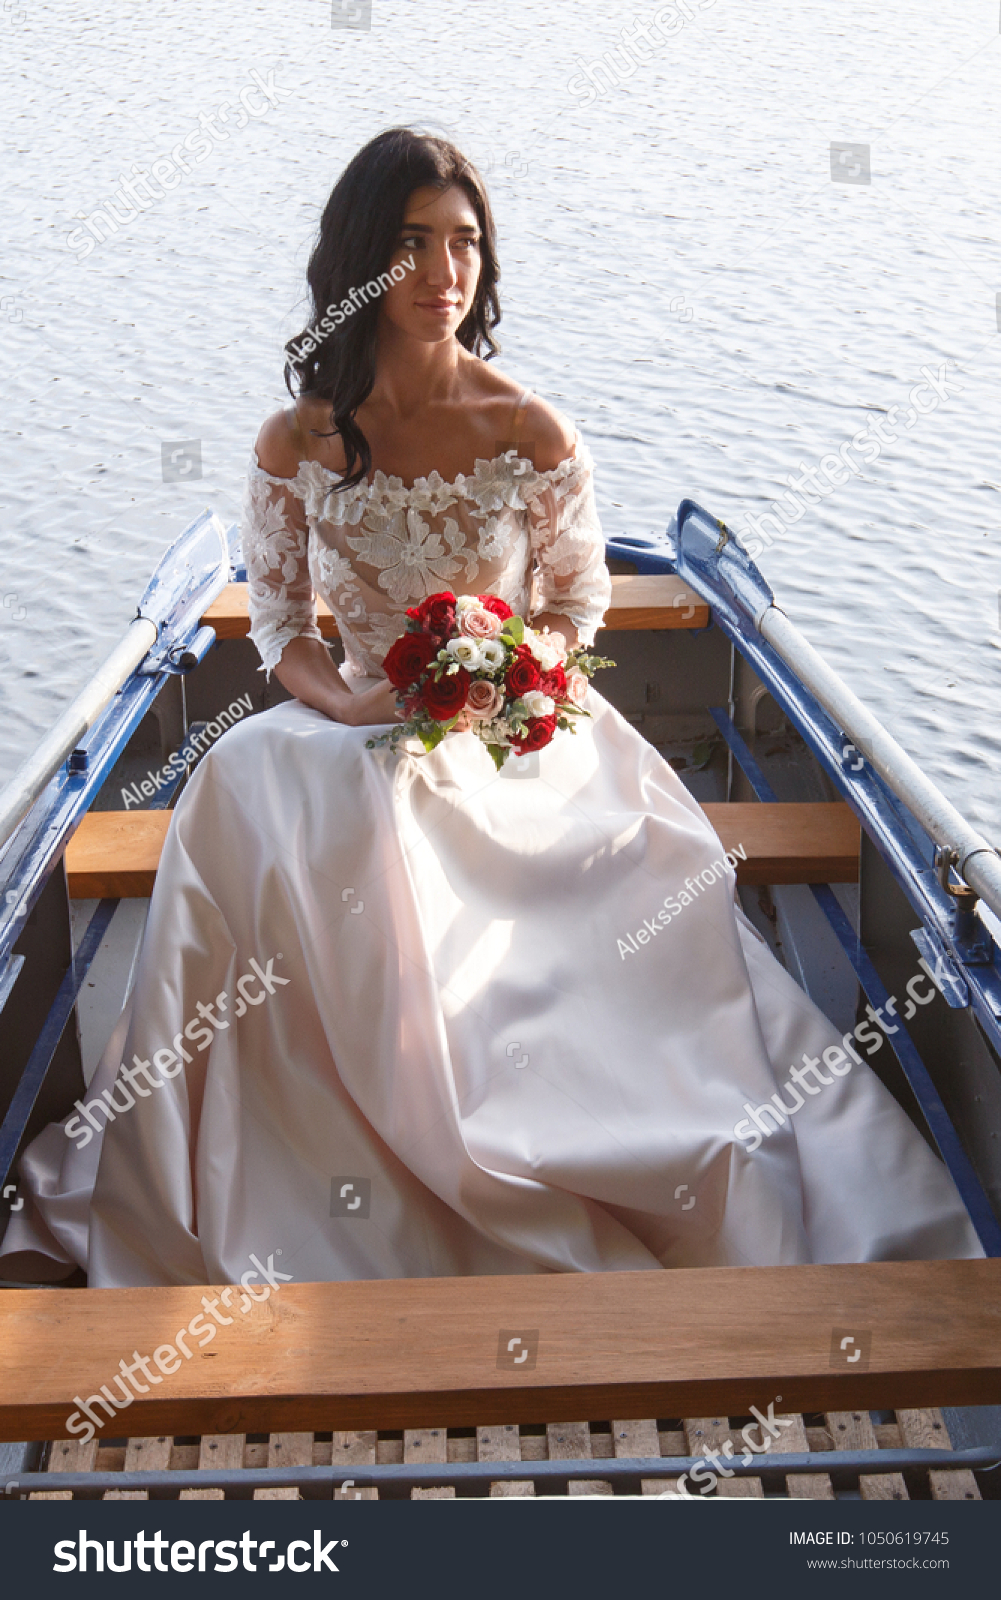 https://image.shutterstock.com/z/stock-photo-young-beautiful-russian-bride-with-long-hair-sitting-in-a-boat-and-holding-a-beautiful-wedding-1050619745.jpg